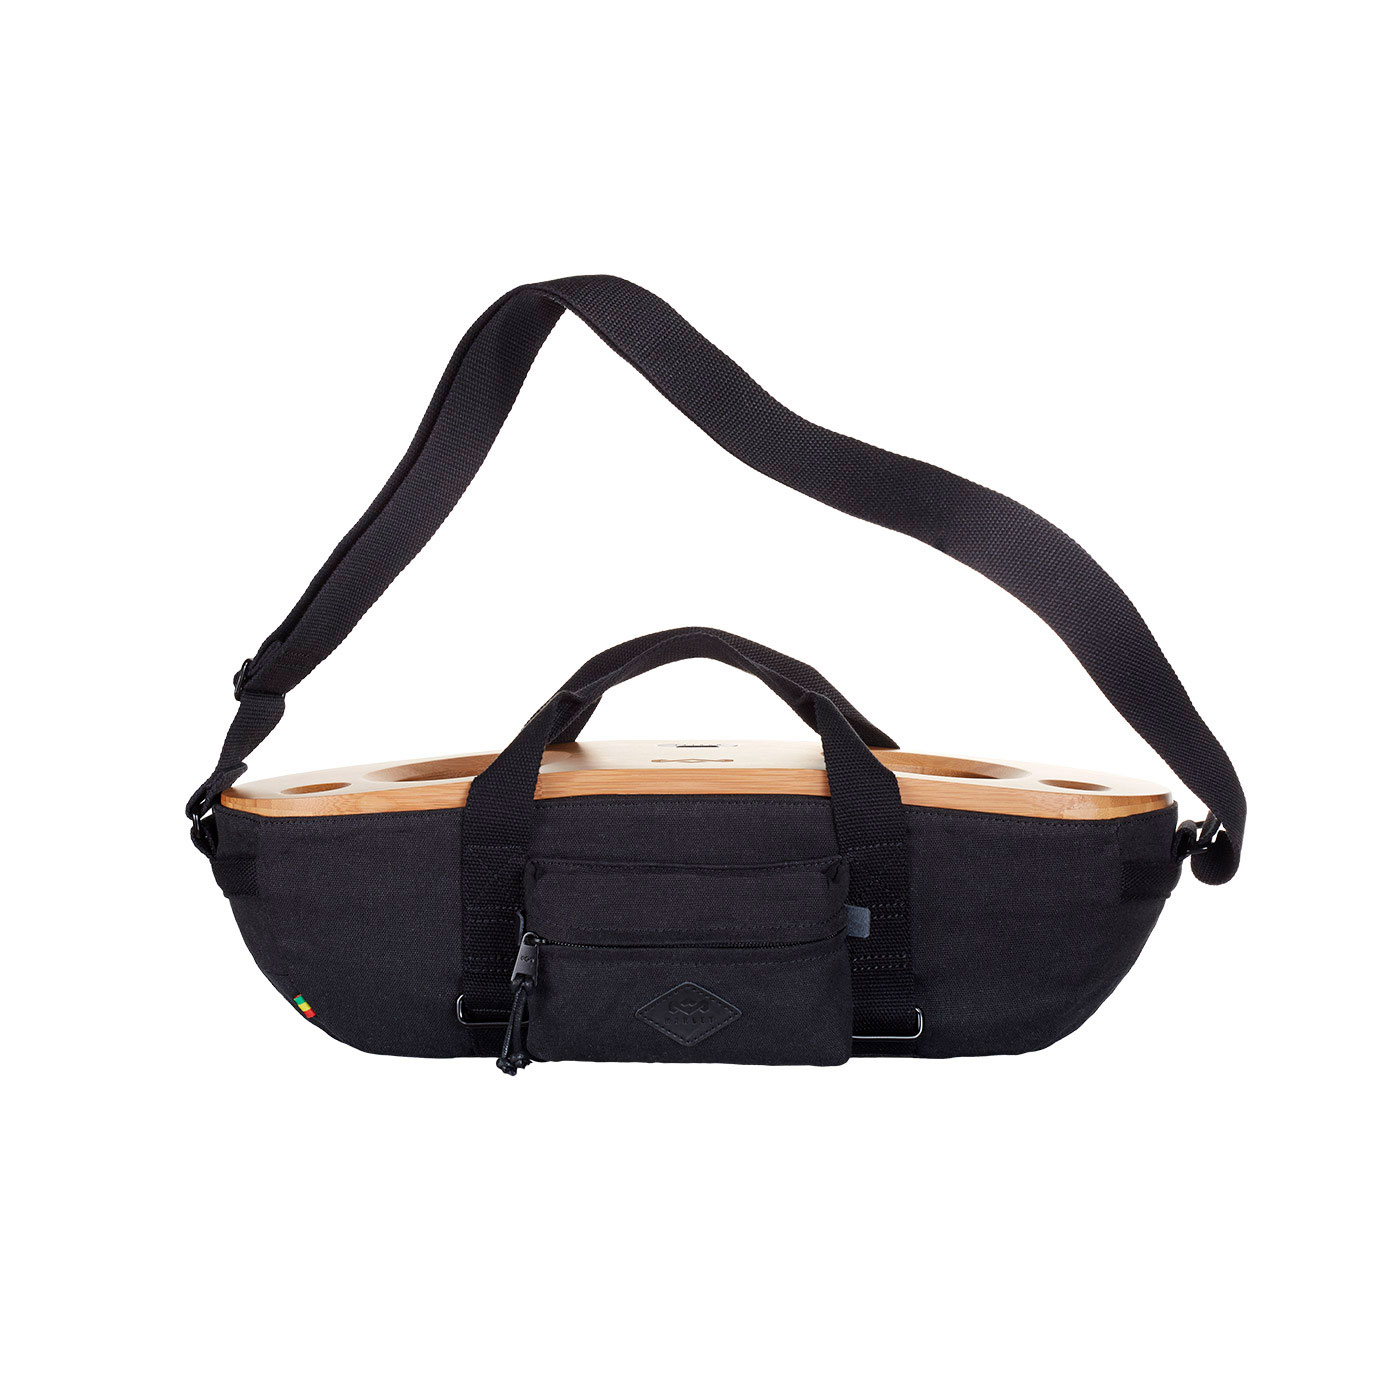 Parlante HOUSE OF MARLEY Bluetooth Bag Of Riddim 2 40W Negro|Bamboo